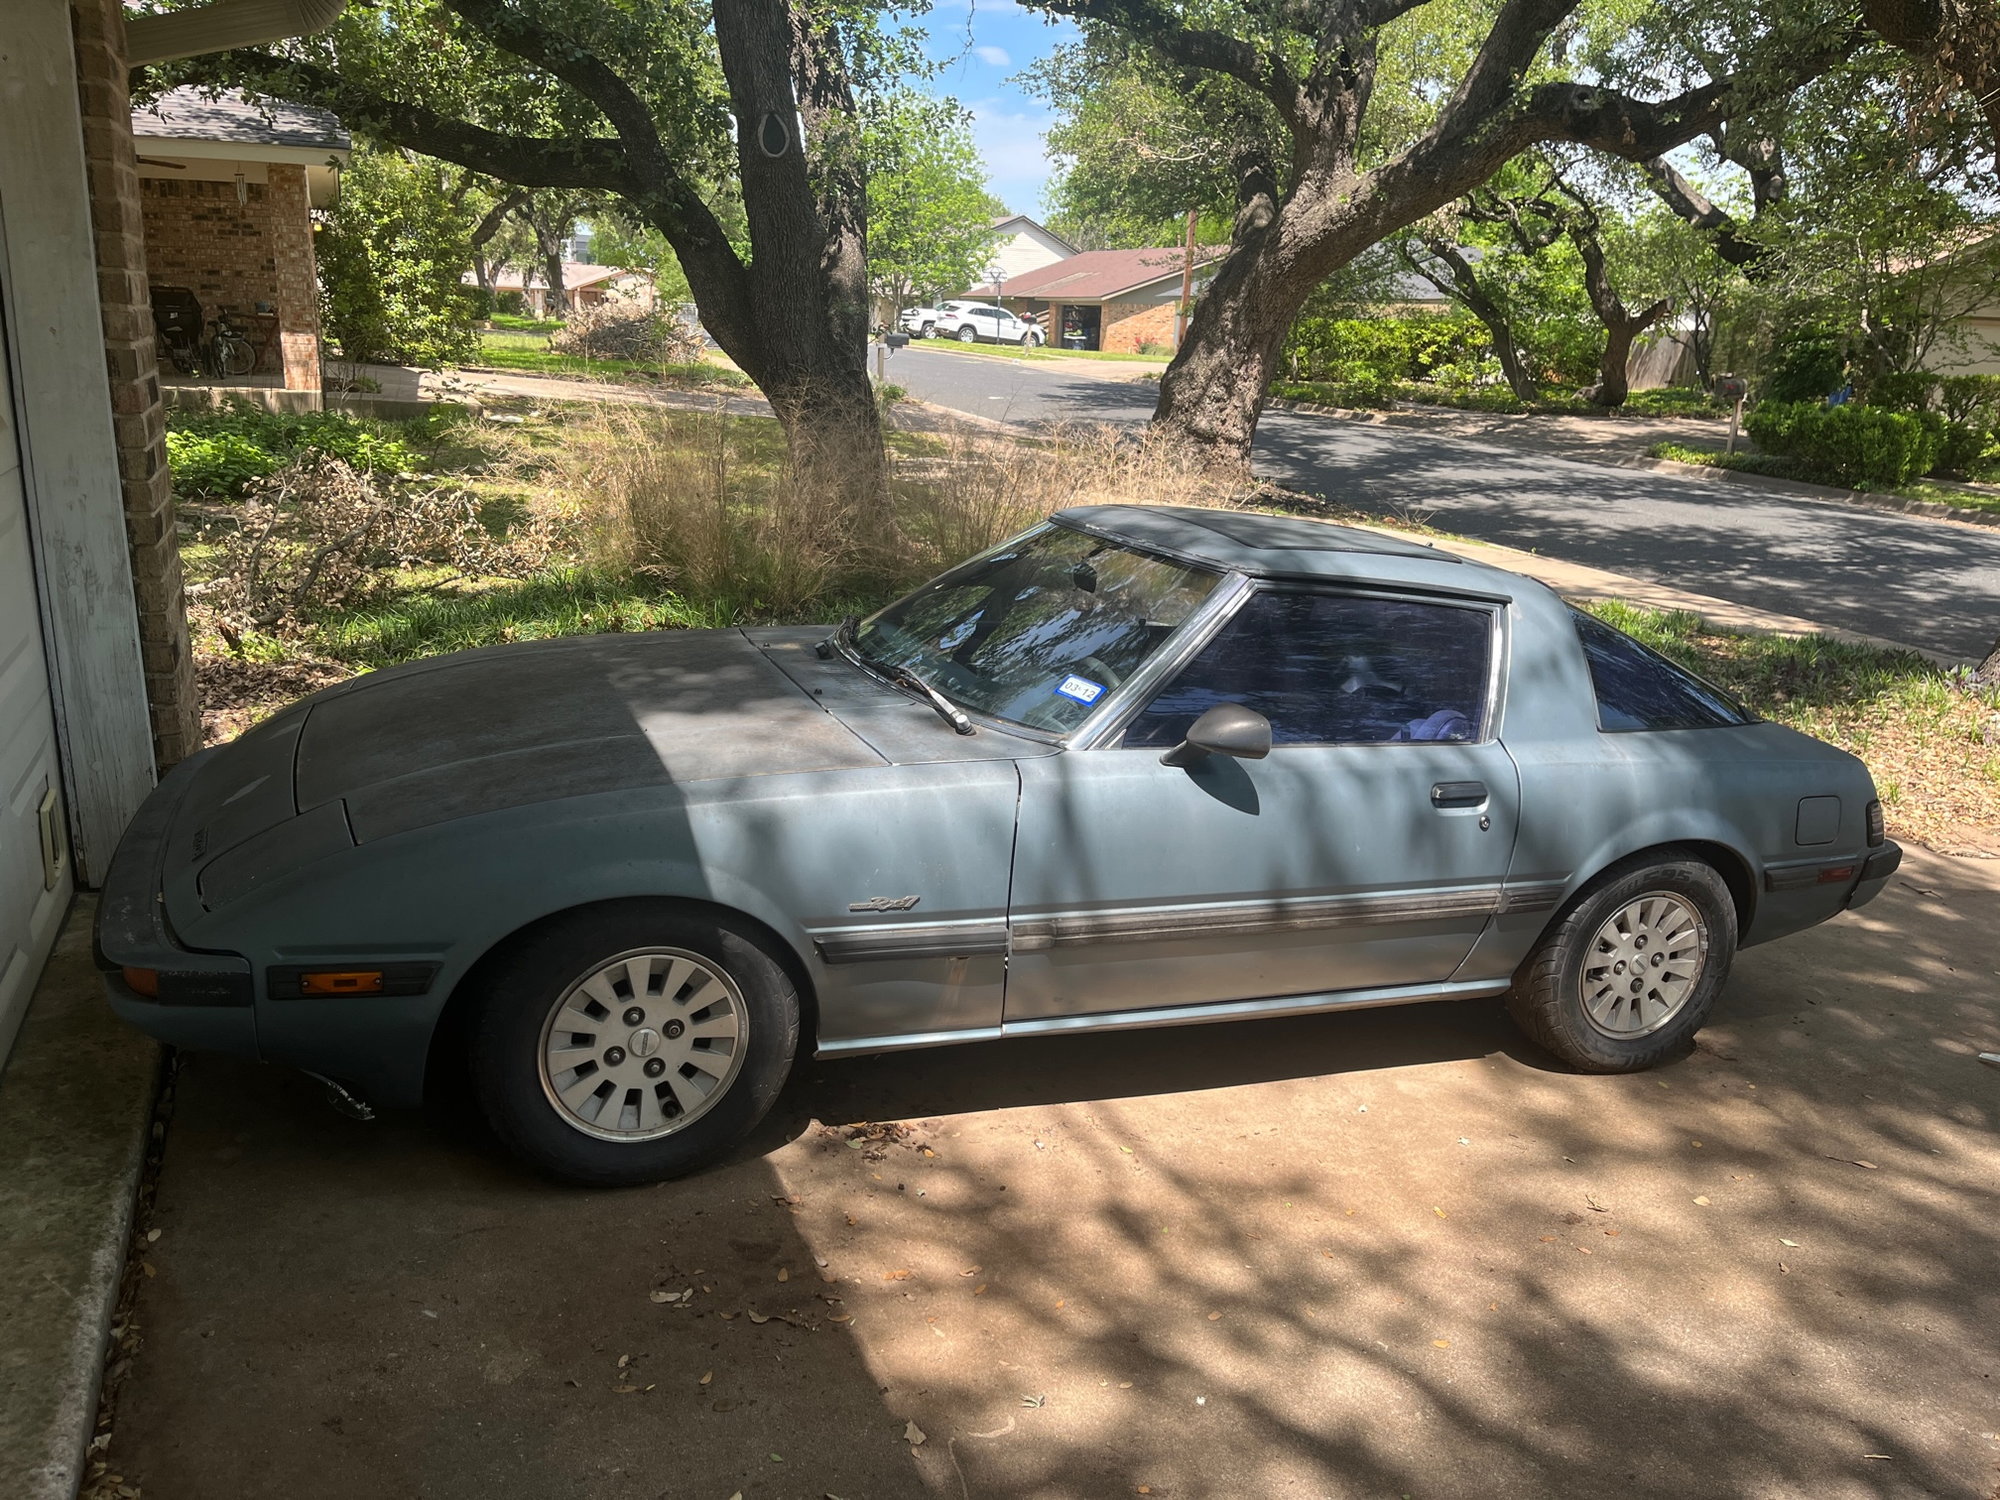 1985 Mazda RX-7 - Selling my 1985 GSL-SE Tender Blue, 161K $3500 (Austin,TX) - Used - VIN will edit - 161,902 Miles - Other - 2WD - Manual - Coupe - Blue - Austin, TX 78749, United States